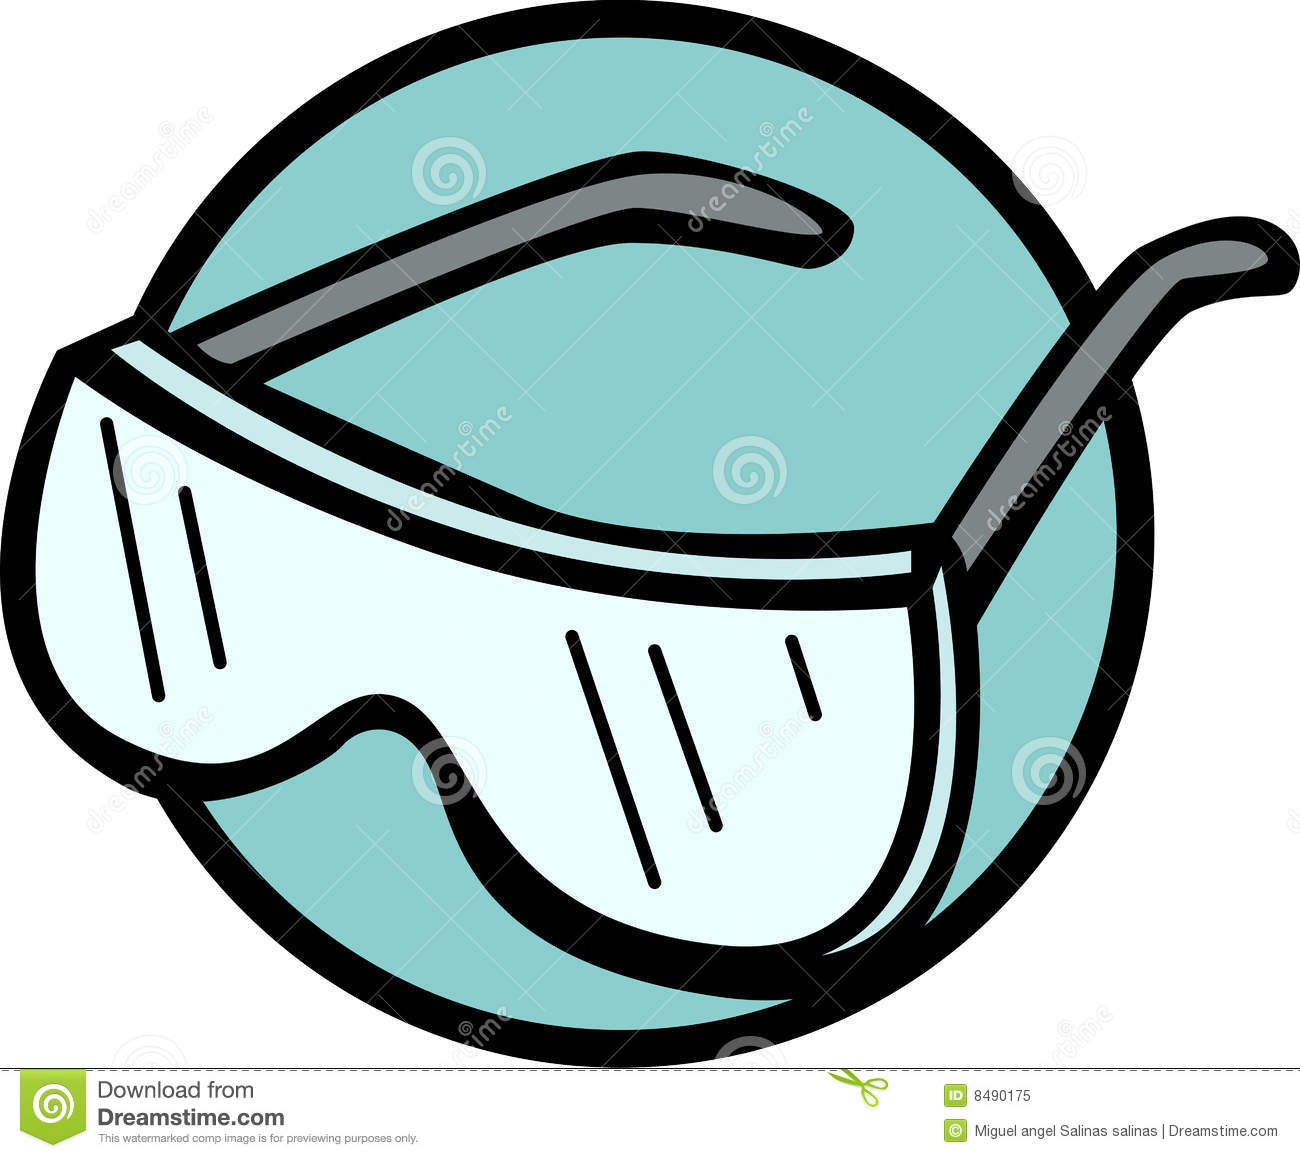 Safety goggles vector illustr - Safety Goggles Clipart